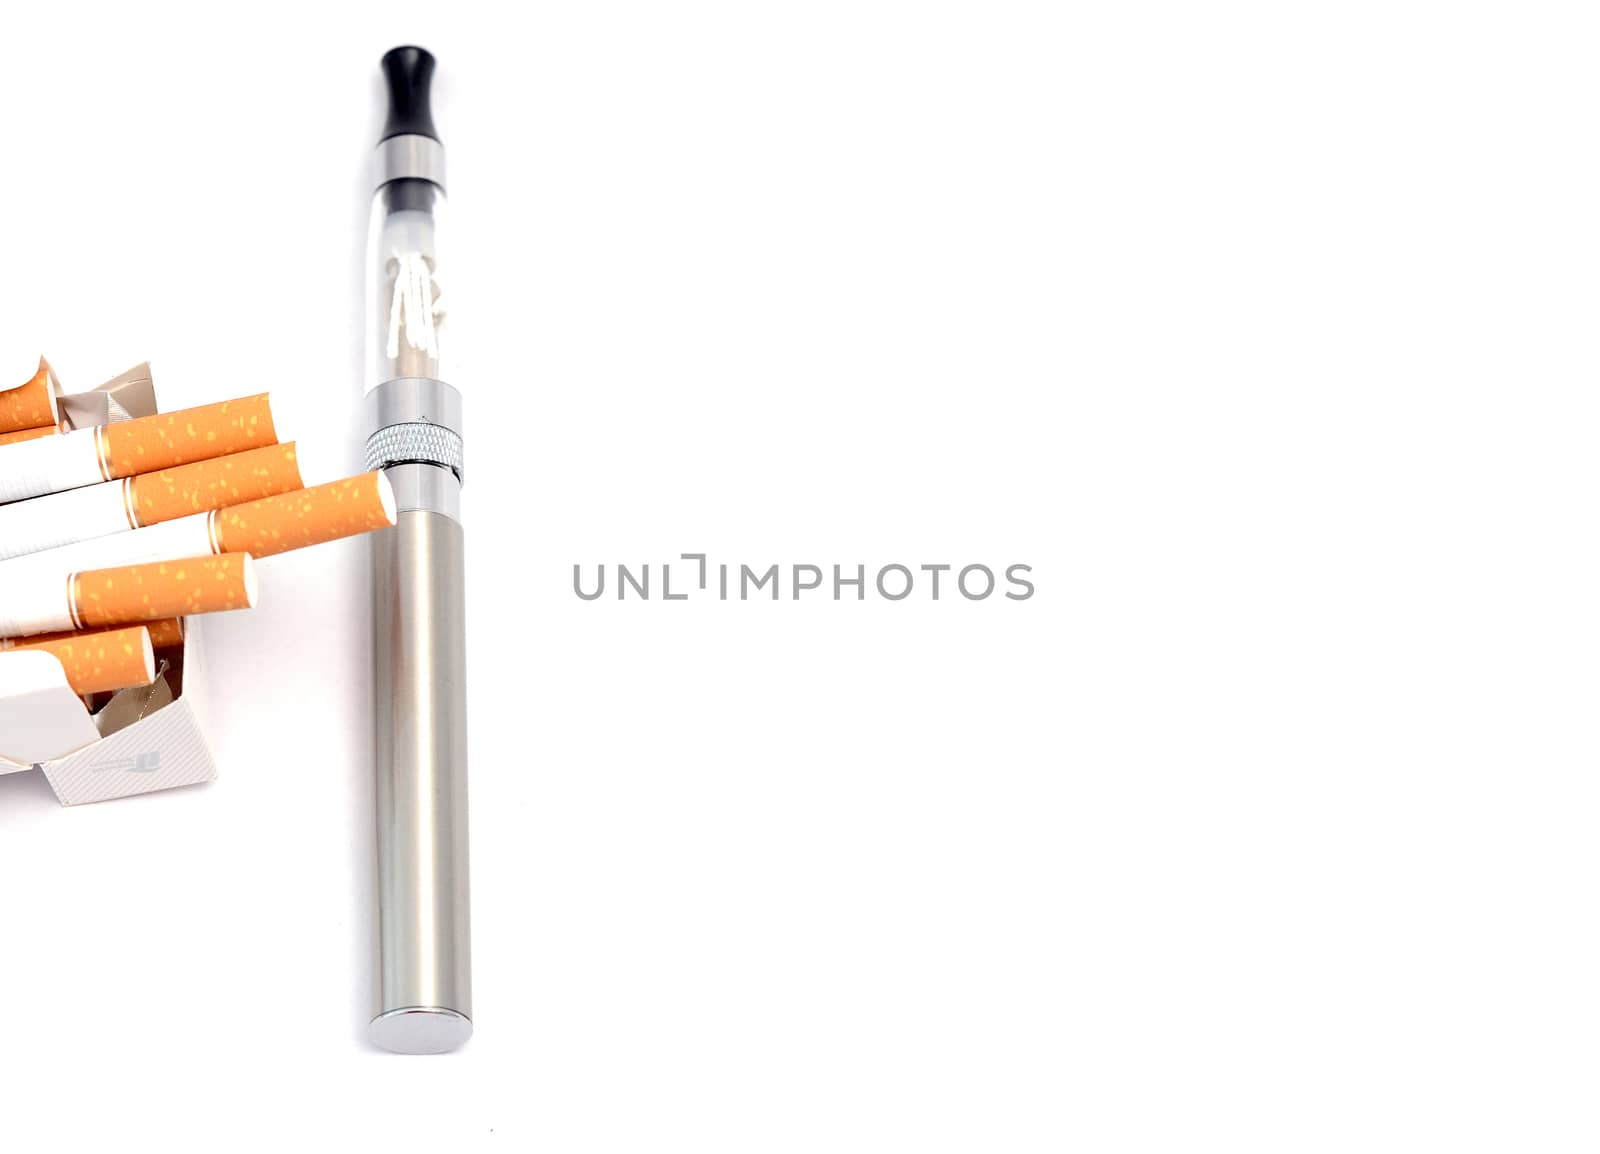 image of a big electronic cigarette on white background